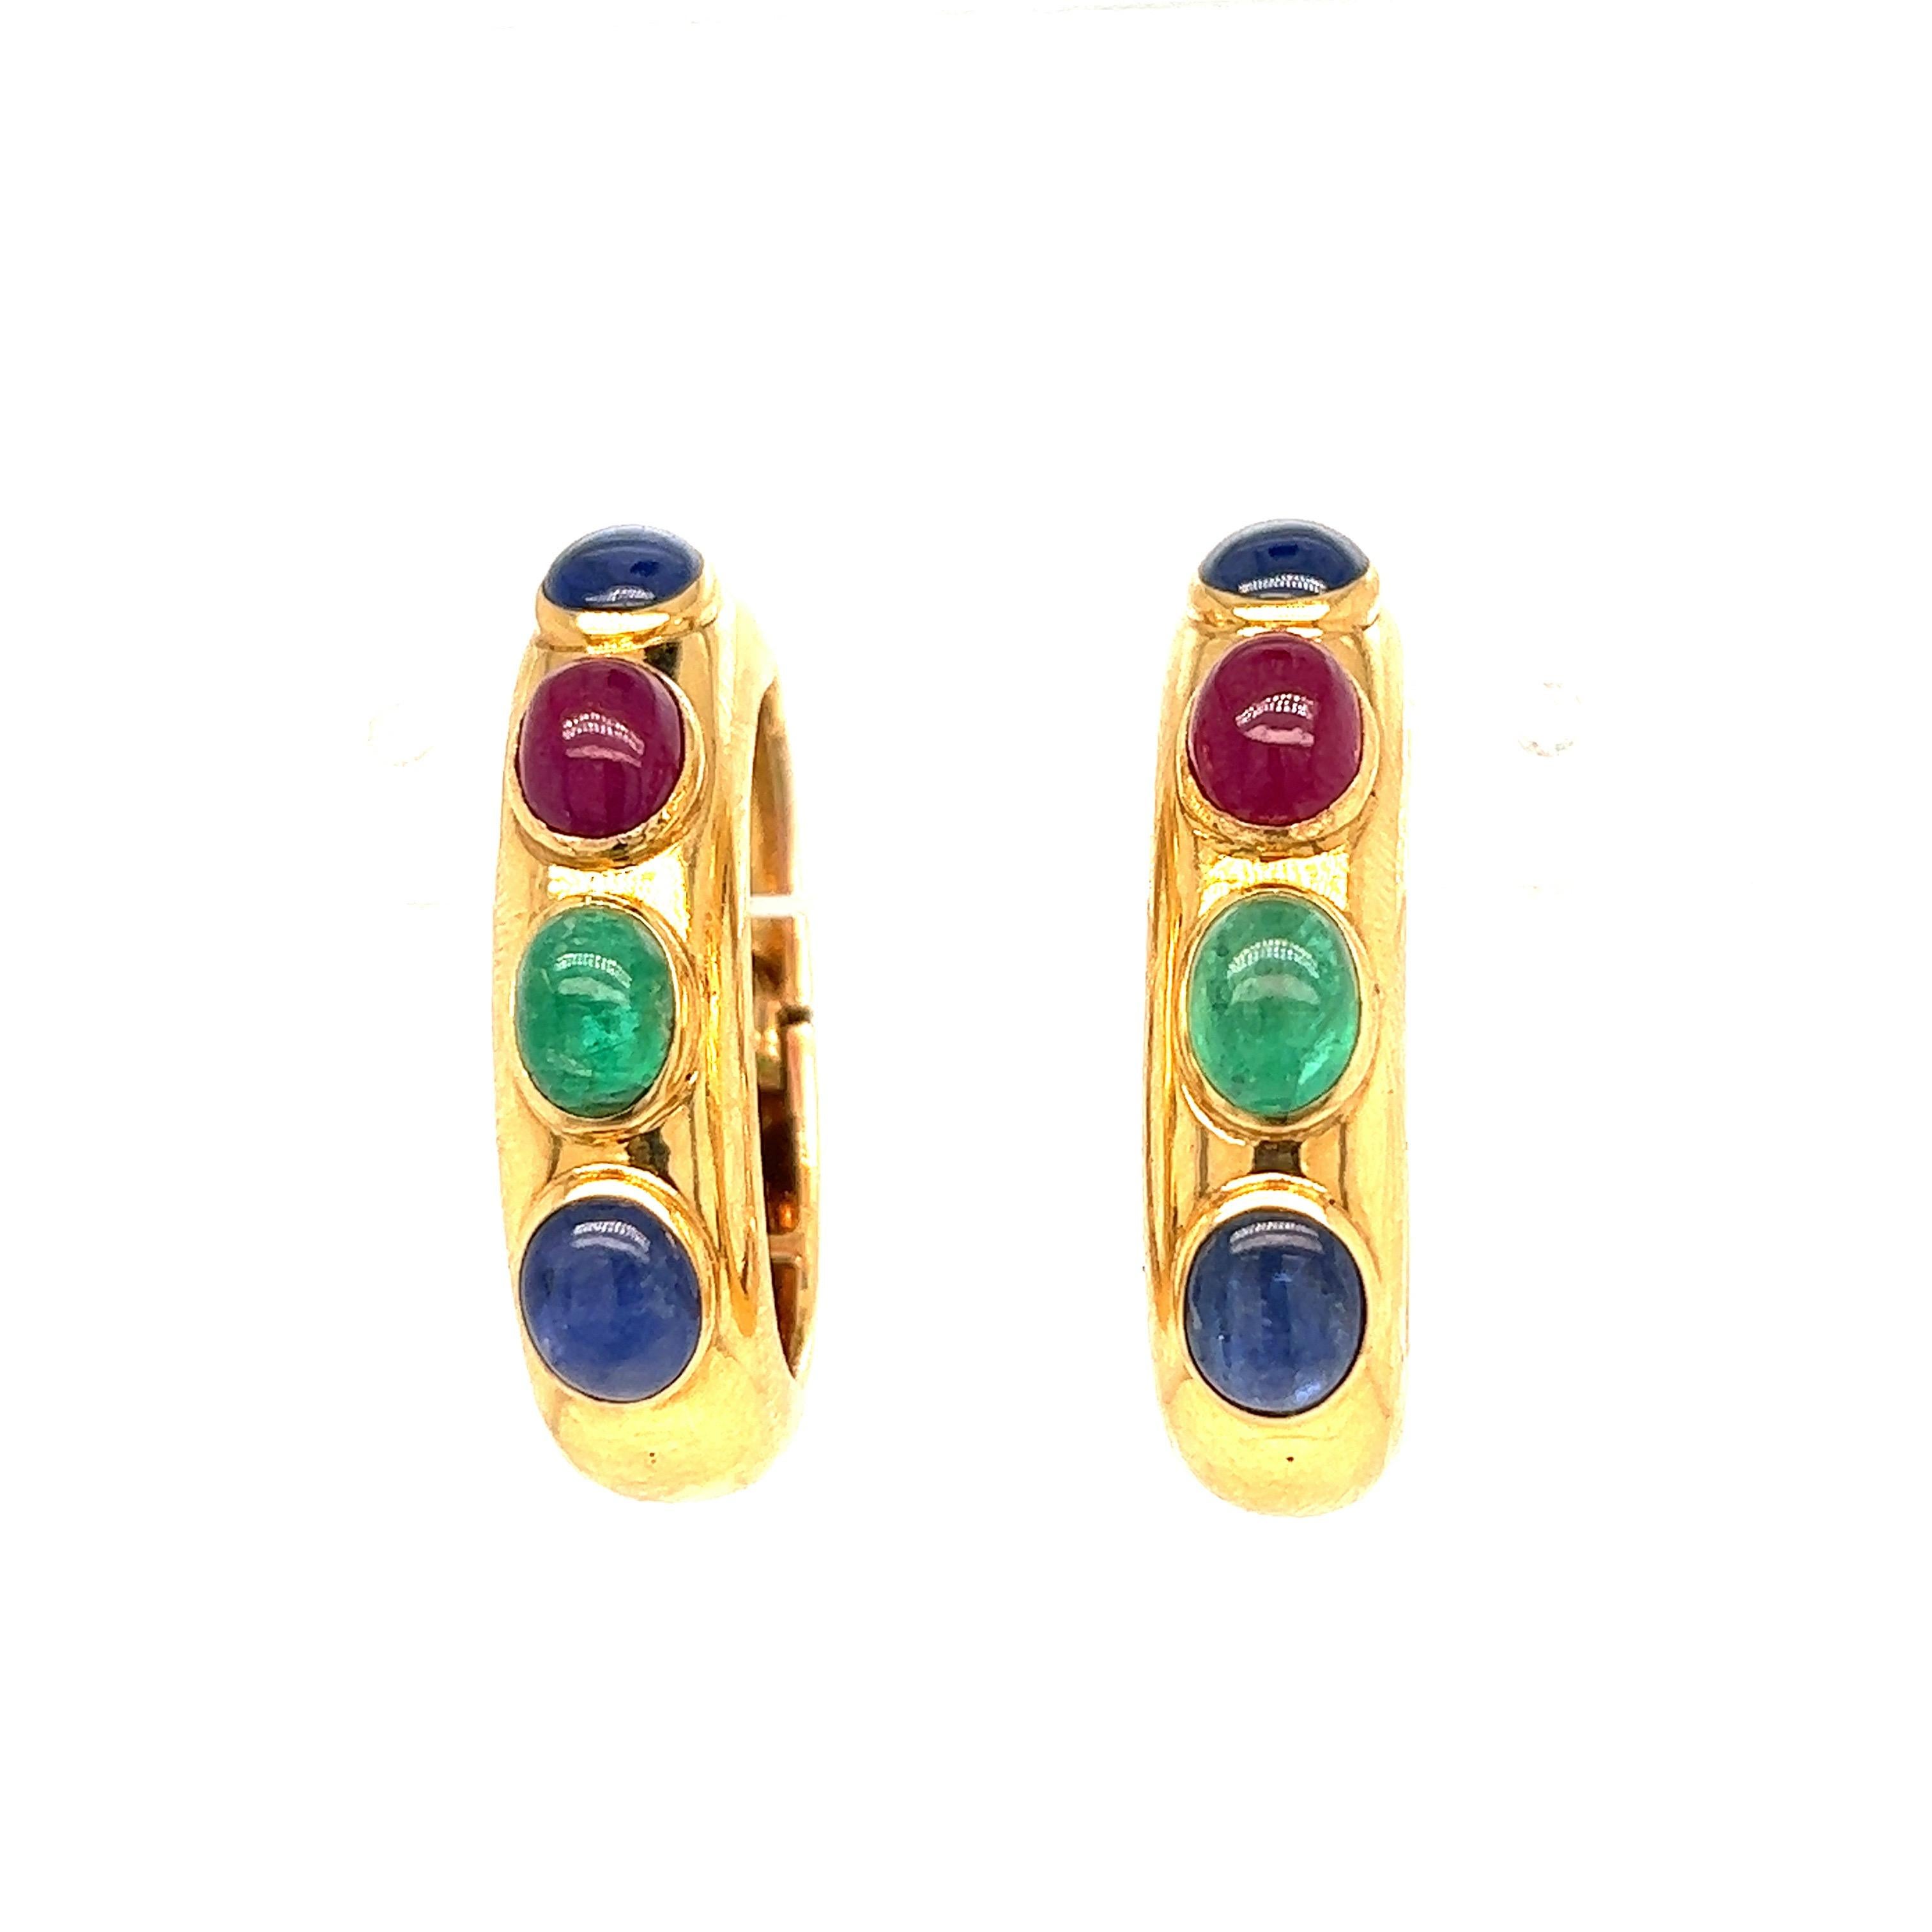 David Webb gold multi-gem ear clips 

Hinged hoops with cabochon rubies, emeralds, and sapphires; 18 karat yellow gold; marked Webb, 18k

Size: width 0.8 cm, length 2.8 cm
Total weight: 17.4 grams 